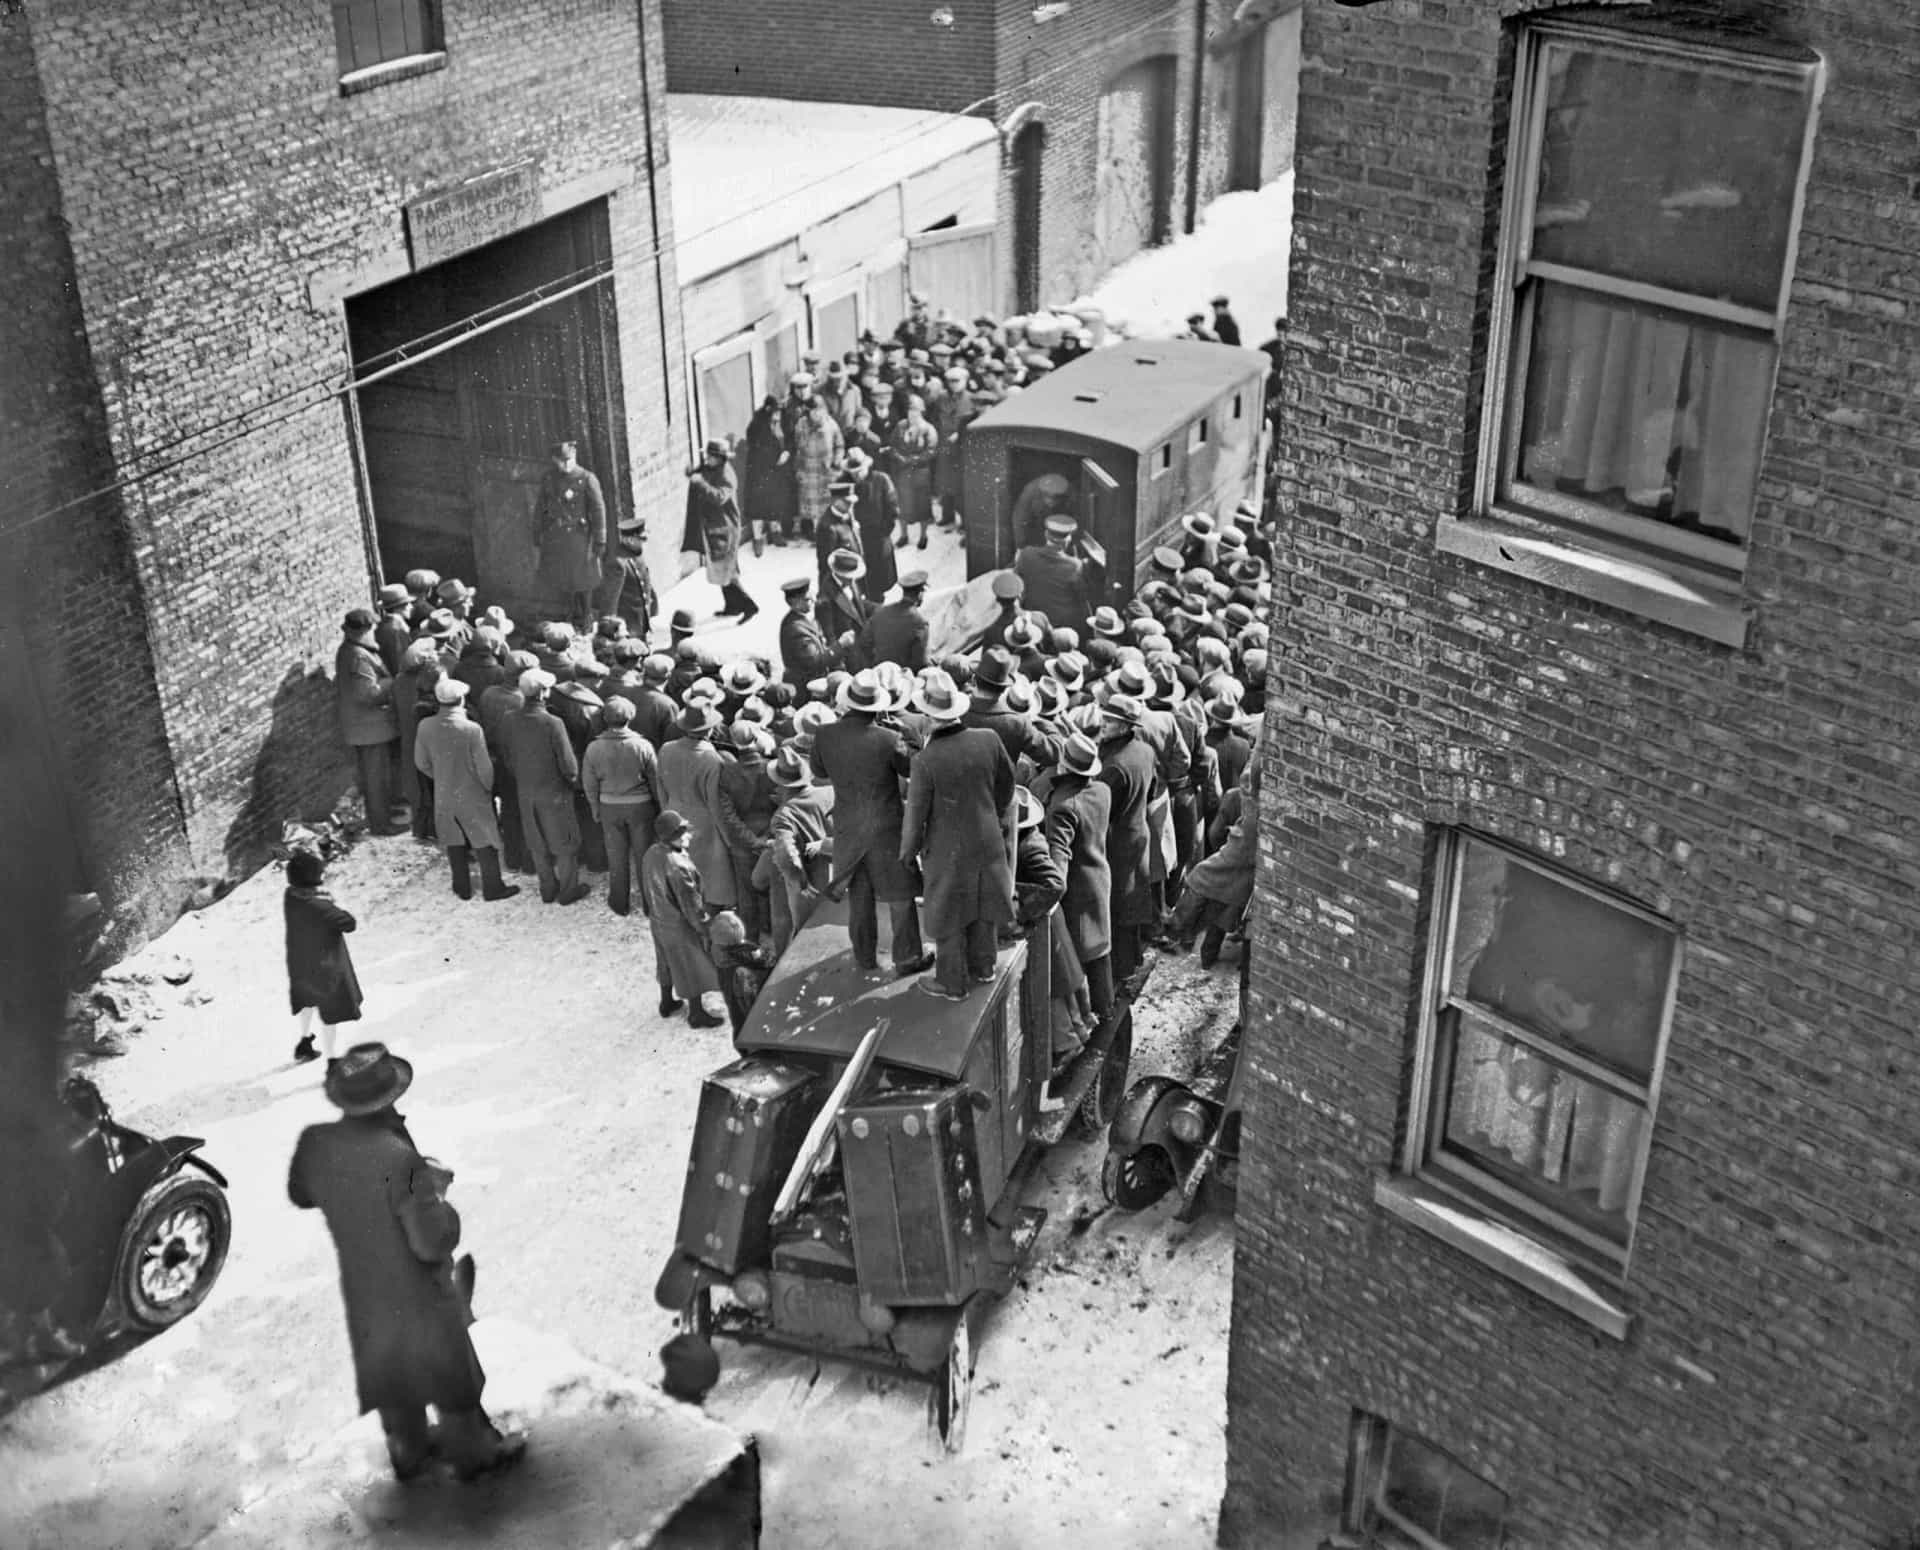 <p>On February 14, 1929, seven members and associates of Moran's North Side Gang were gunned down by four unknown assailants who were dressed as police officers. The killings took place inside a garage in the Lincoln Park neighborhood of Chicago. Capone was widely assumed to be behind the killings. Pictured is a crowd of onlookers gathered outside the premises as one of the murder victims is placed in an ambulance.</p>